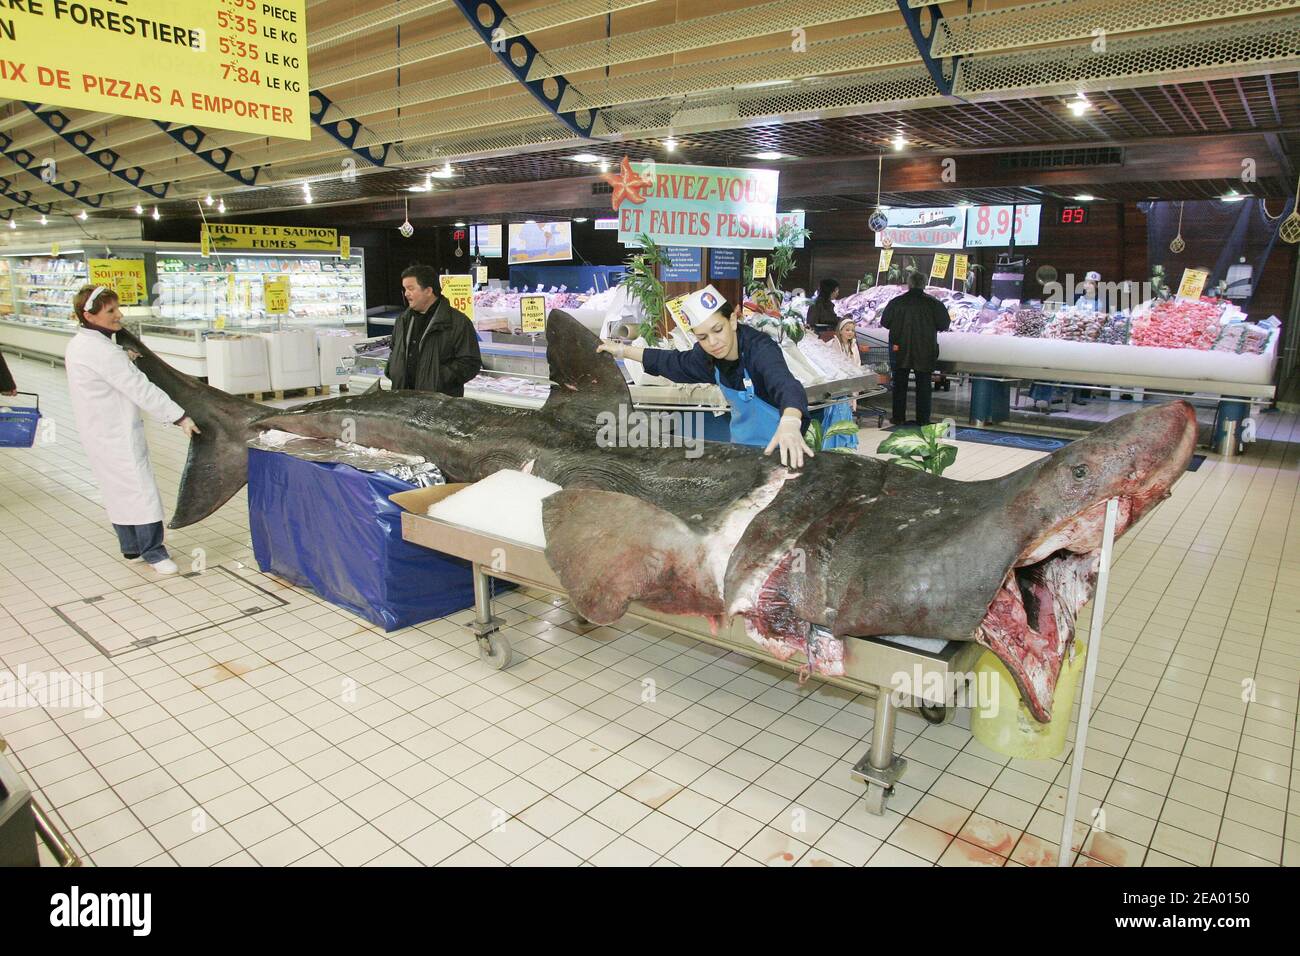 A 6 meters long and 700 kilos weight basking shark fished near Arcachon,  France on February 8, 2005 is actually exposed at the Leclerc supermarket  at Saint Eulalie, near Bordeaux, France.This non